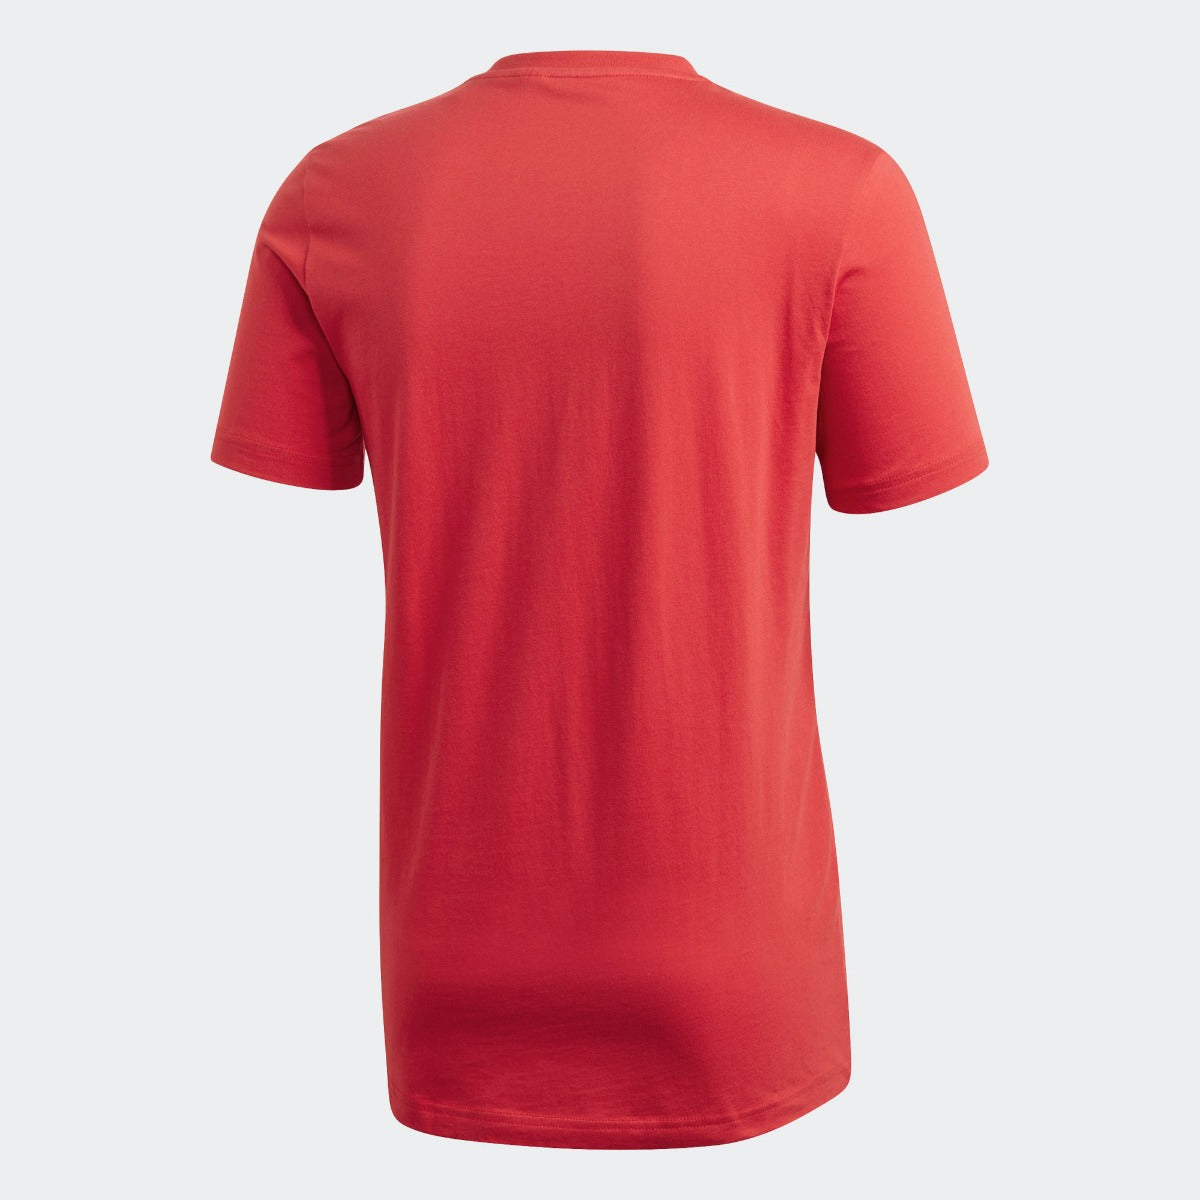 Adidas 2020-21 Manchester United DNA Graphic Tee - Red-Black